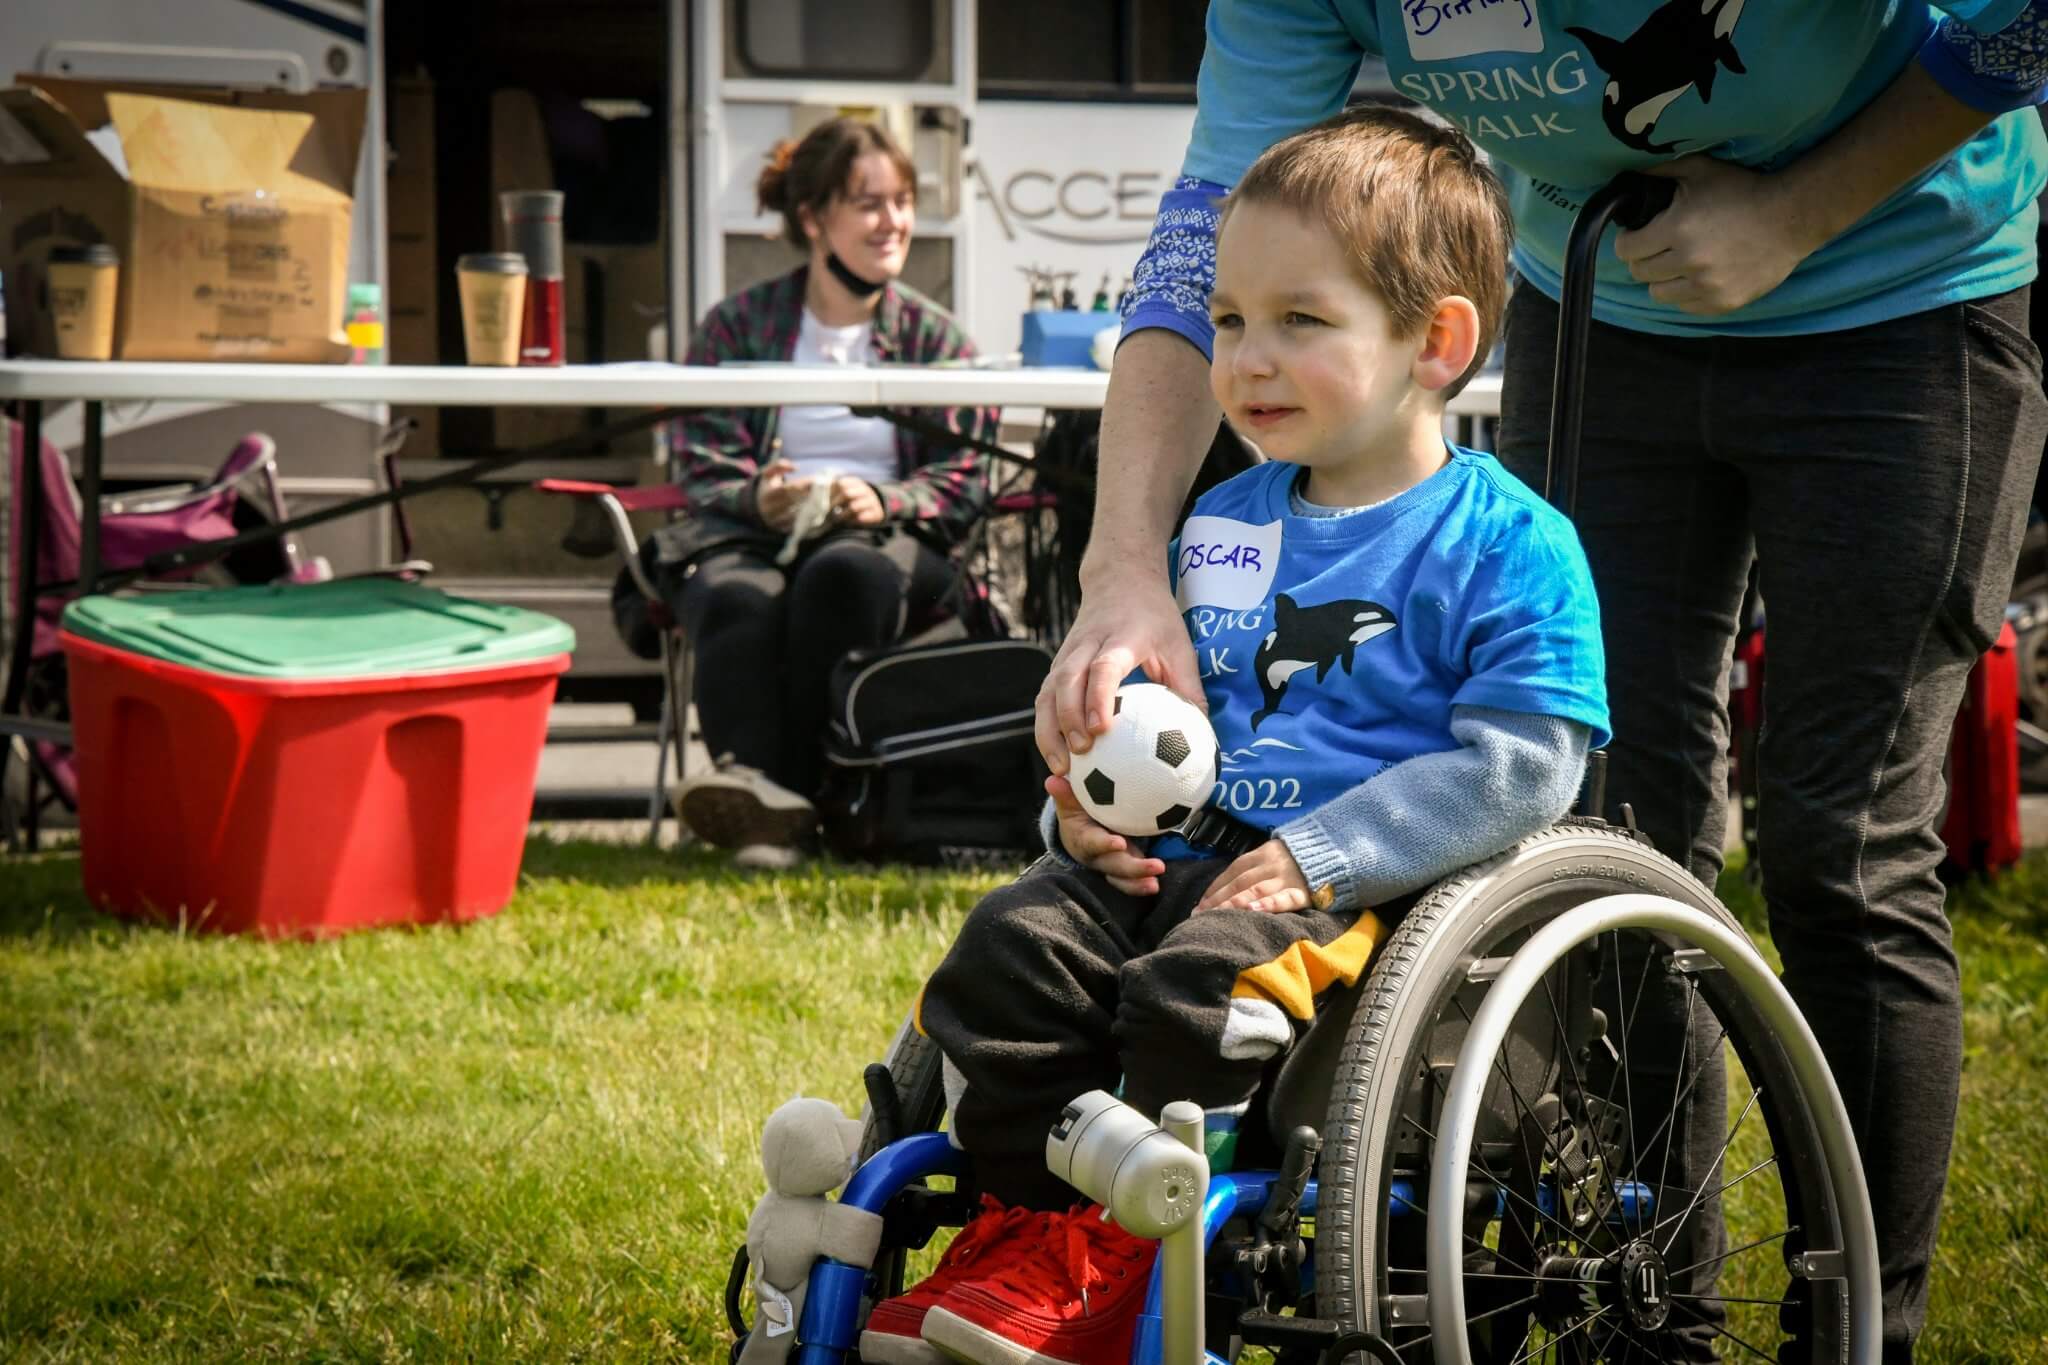 Young boy in a wheelchair is outside on a field and being handed a soccer ball